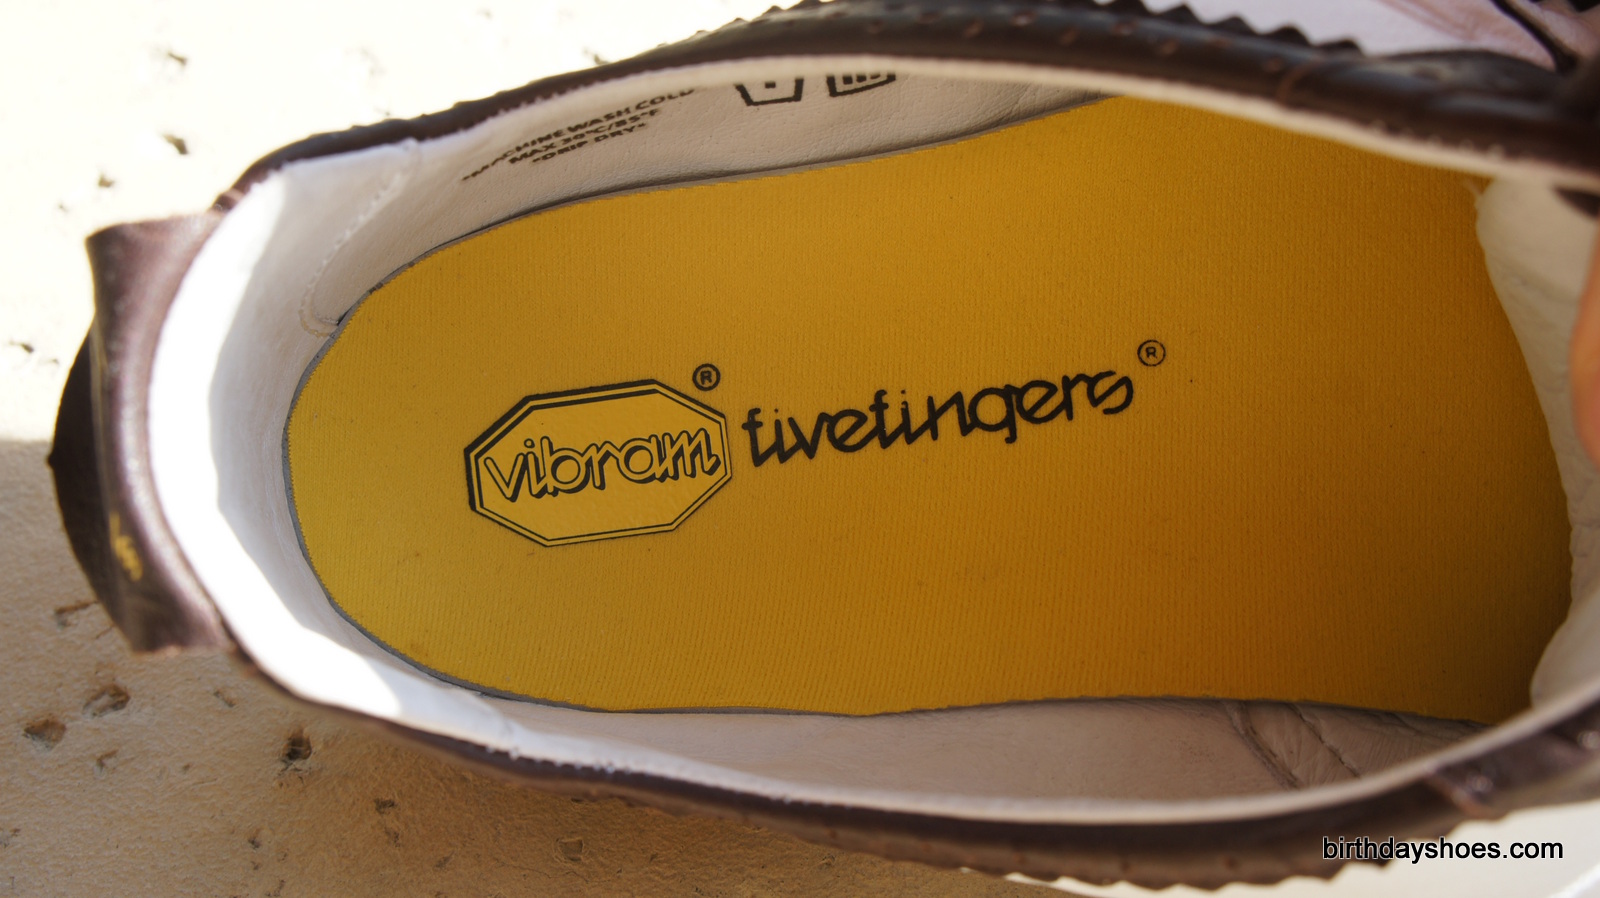 A look at the non-removable insole.